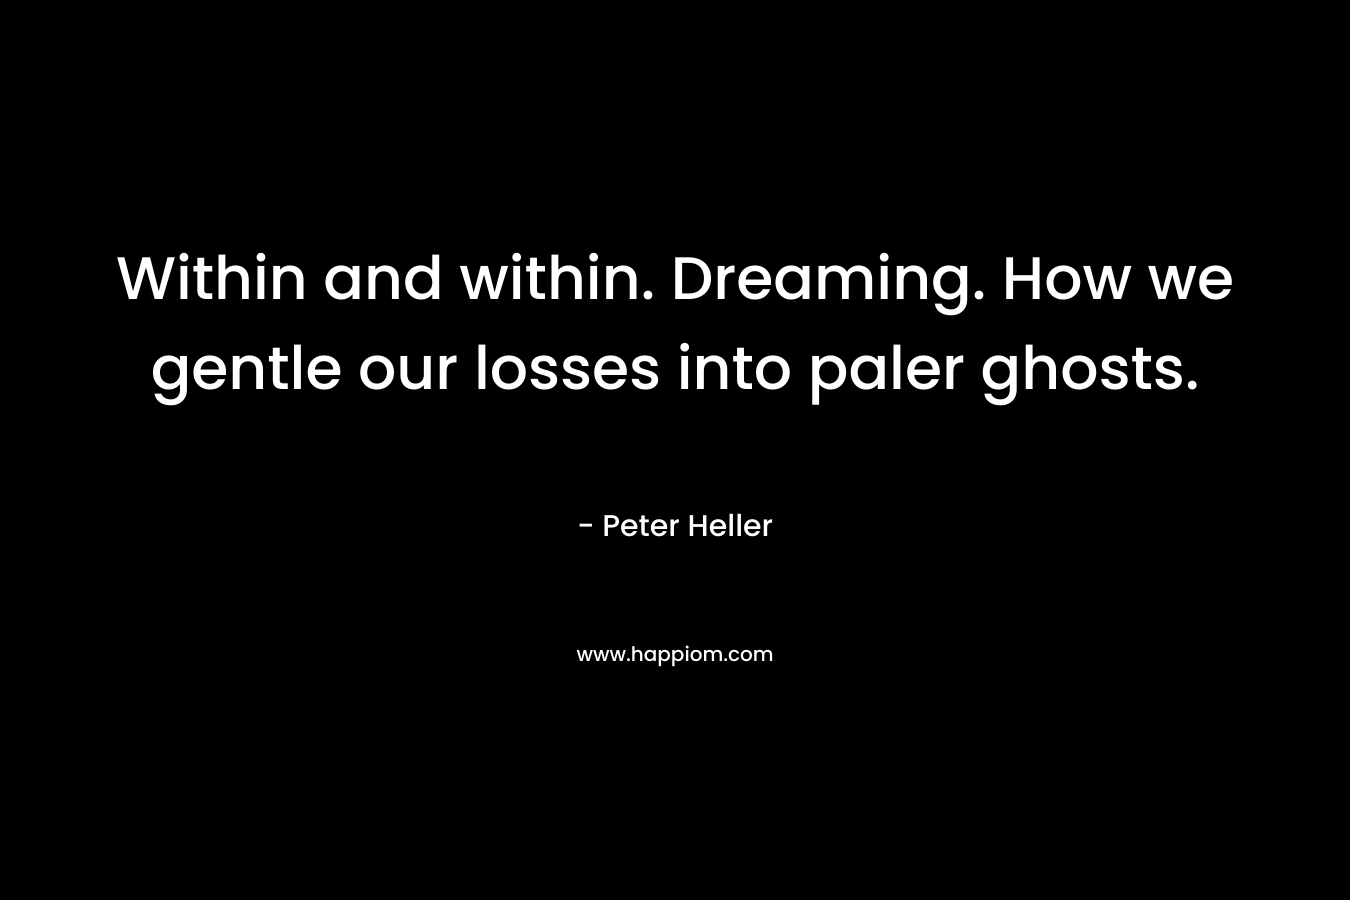 Within and within. Dreaming. How we gentle our losses into paler ghosts. – Peter Heller